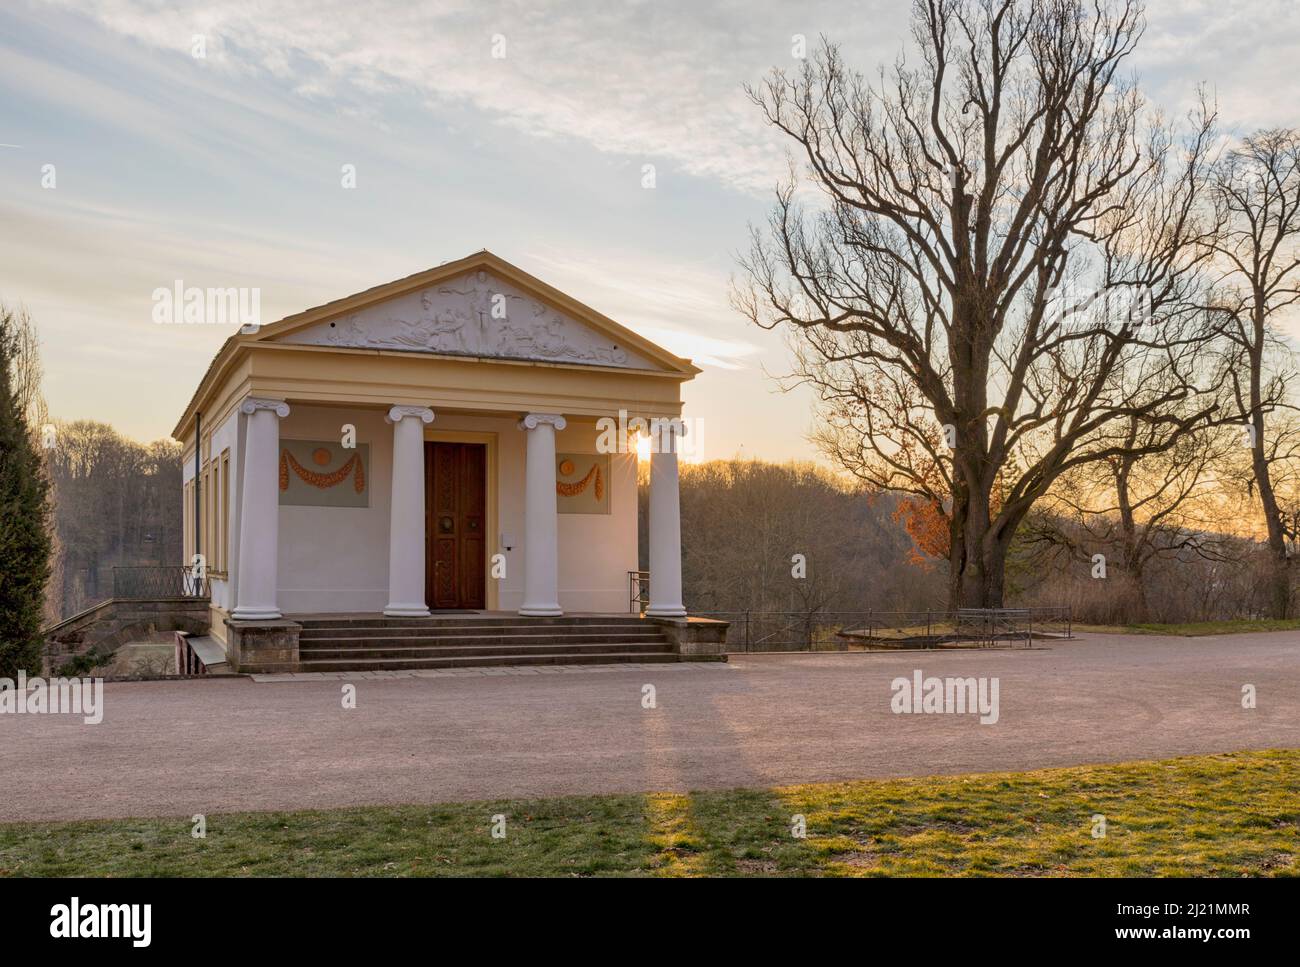 Roman House at Park an der Ilm, Weimar, Germany, built in 1798 for Karl August, Grand Duke of Saxe-Weimar-Eisenach Stock Photo